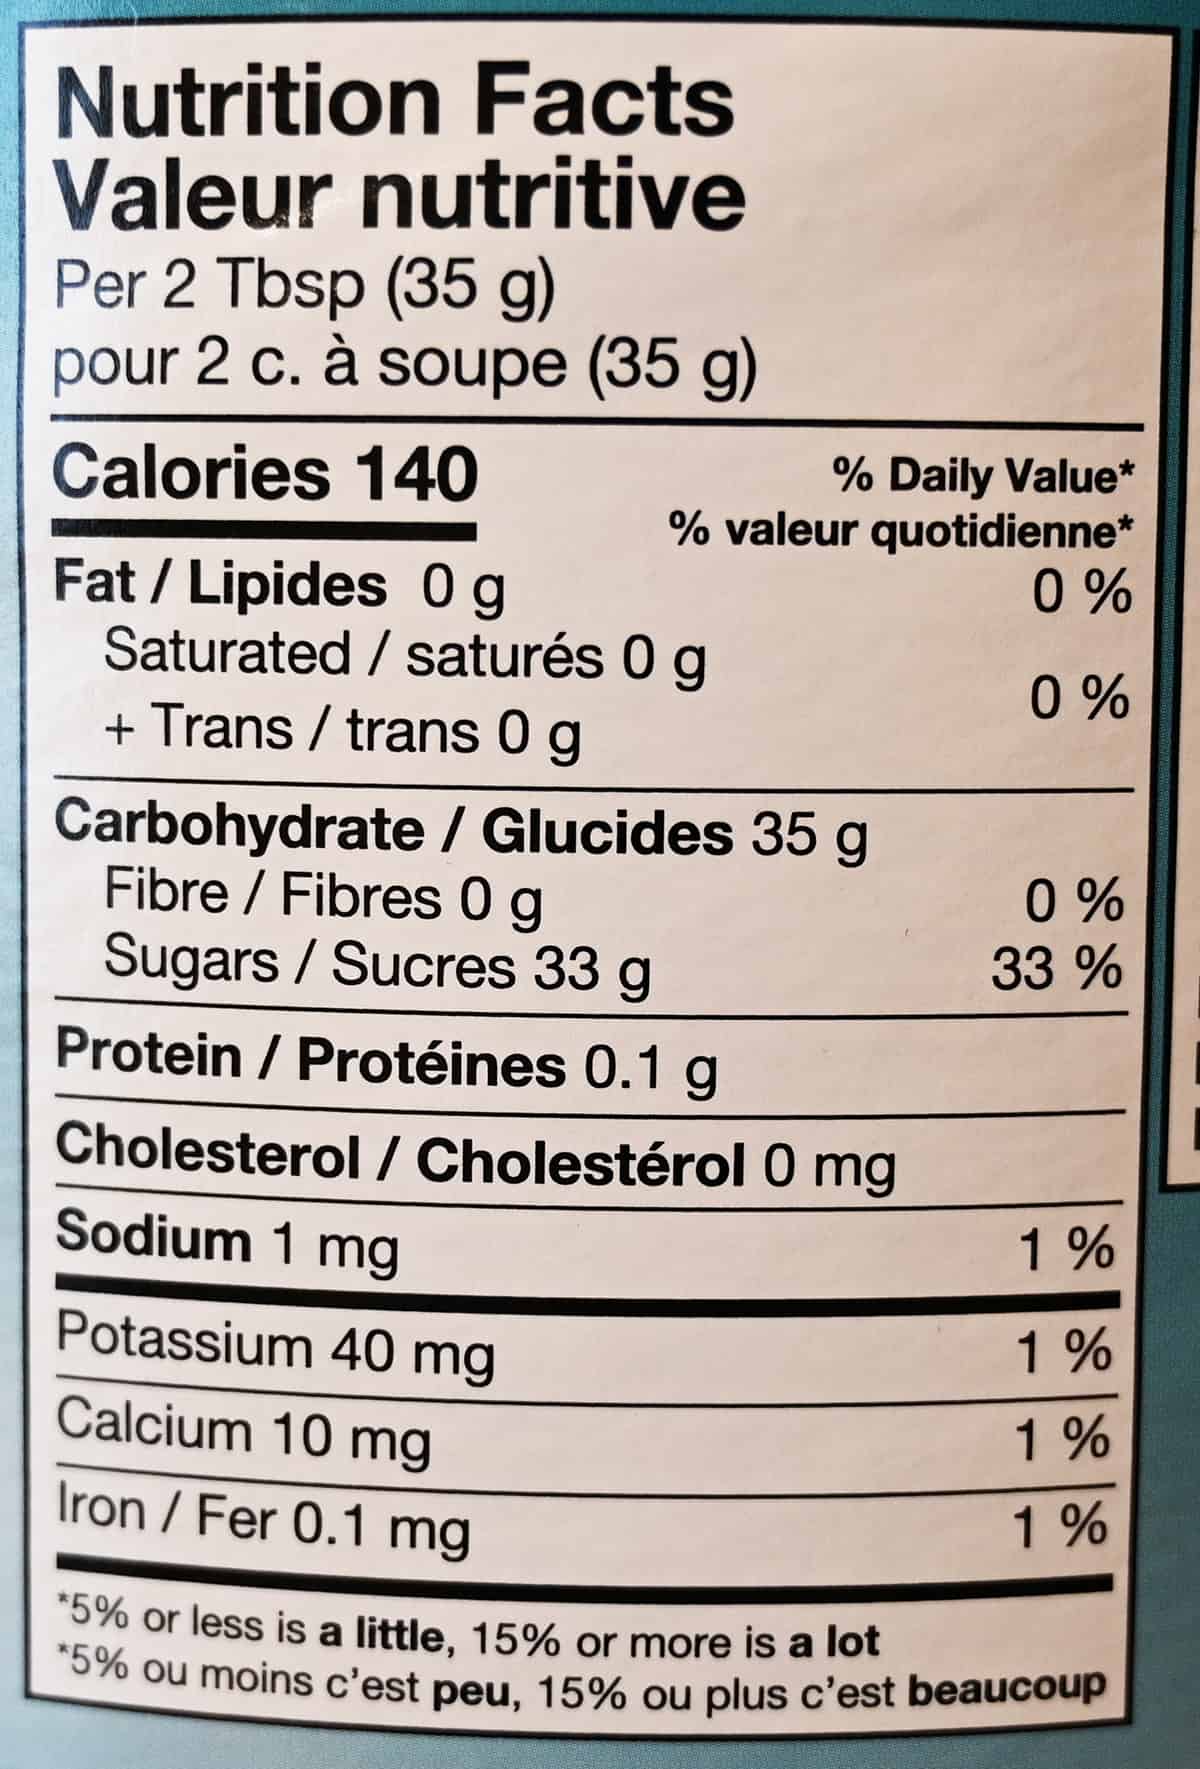 Image of the nutrition facts label from the back of the container.